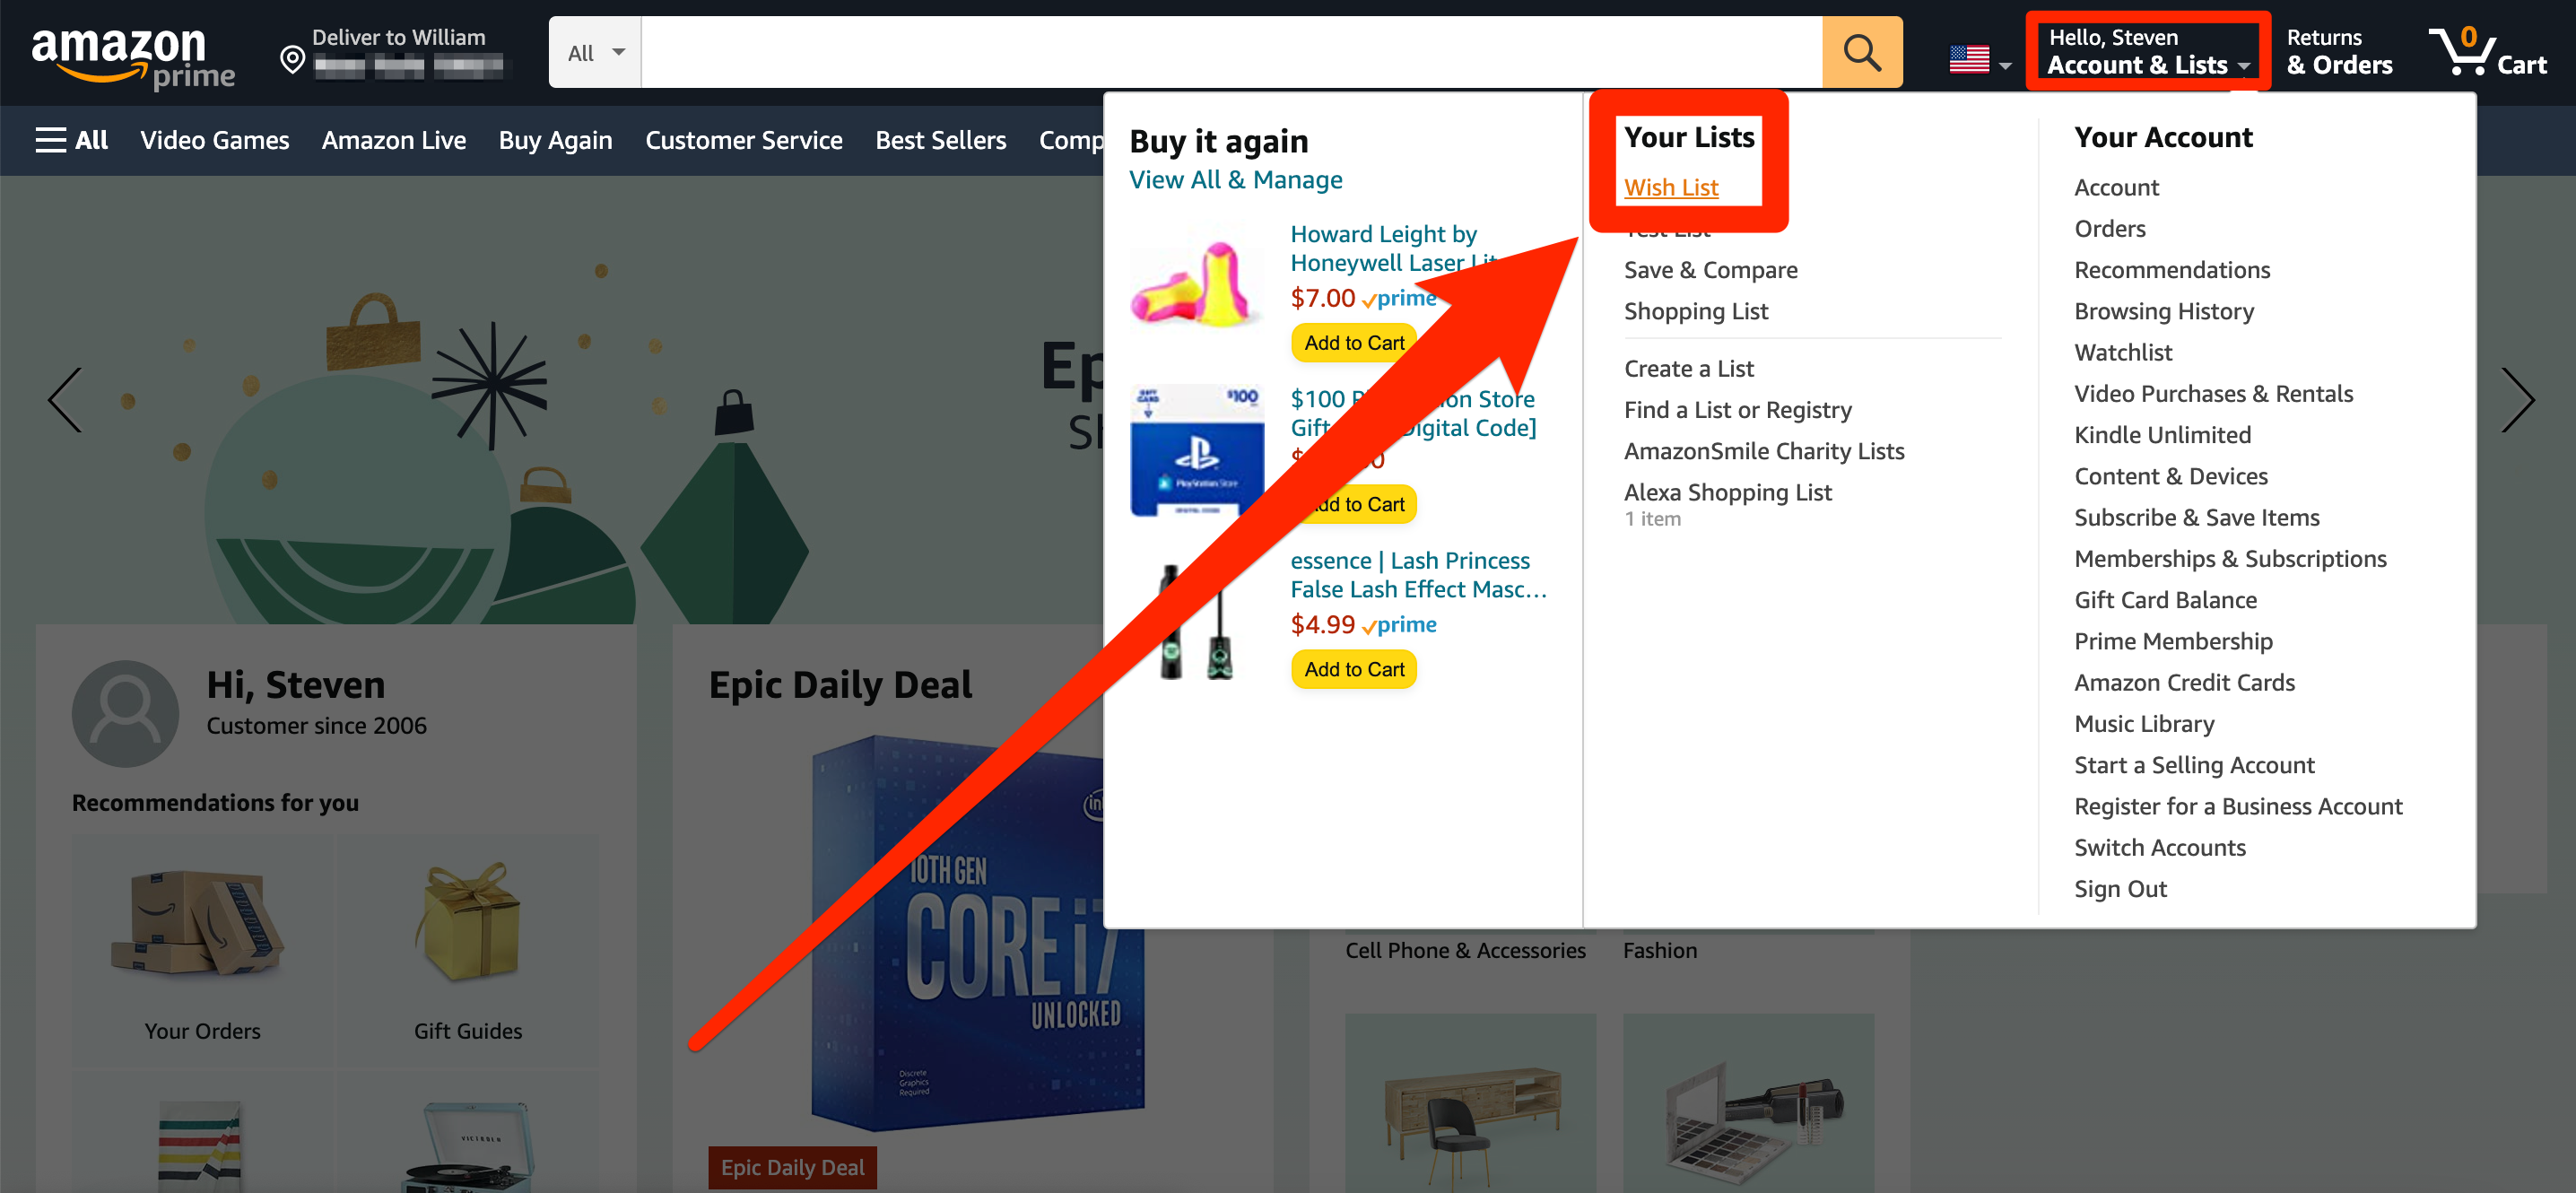 The Amazon homepage, with the account navigation menu open.